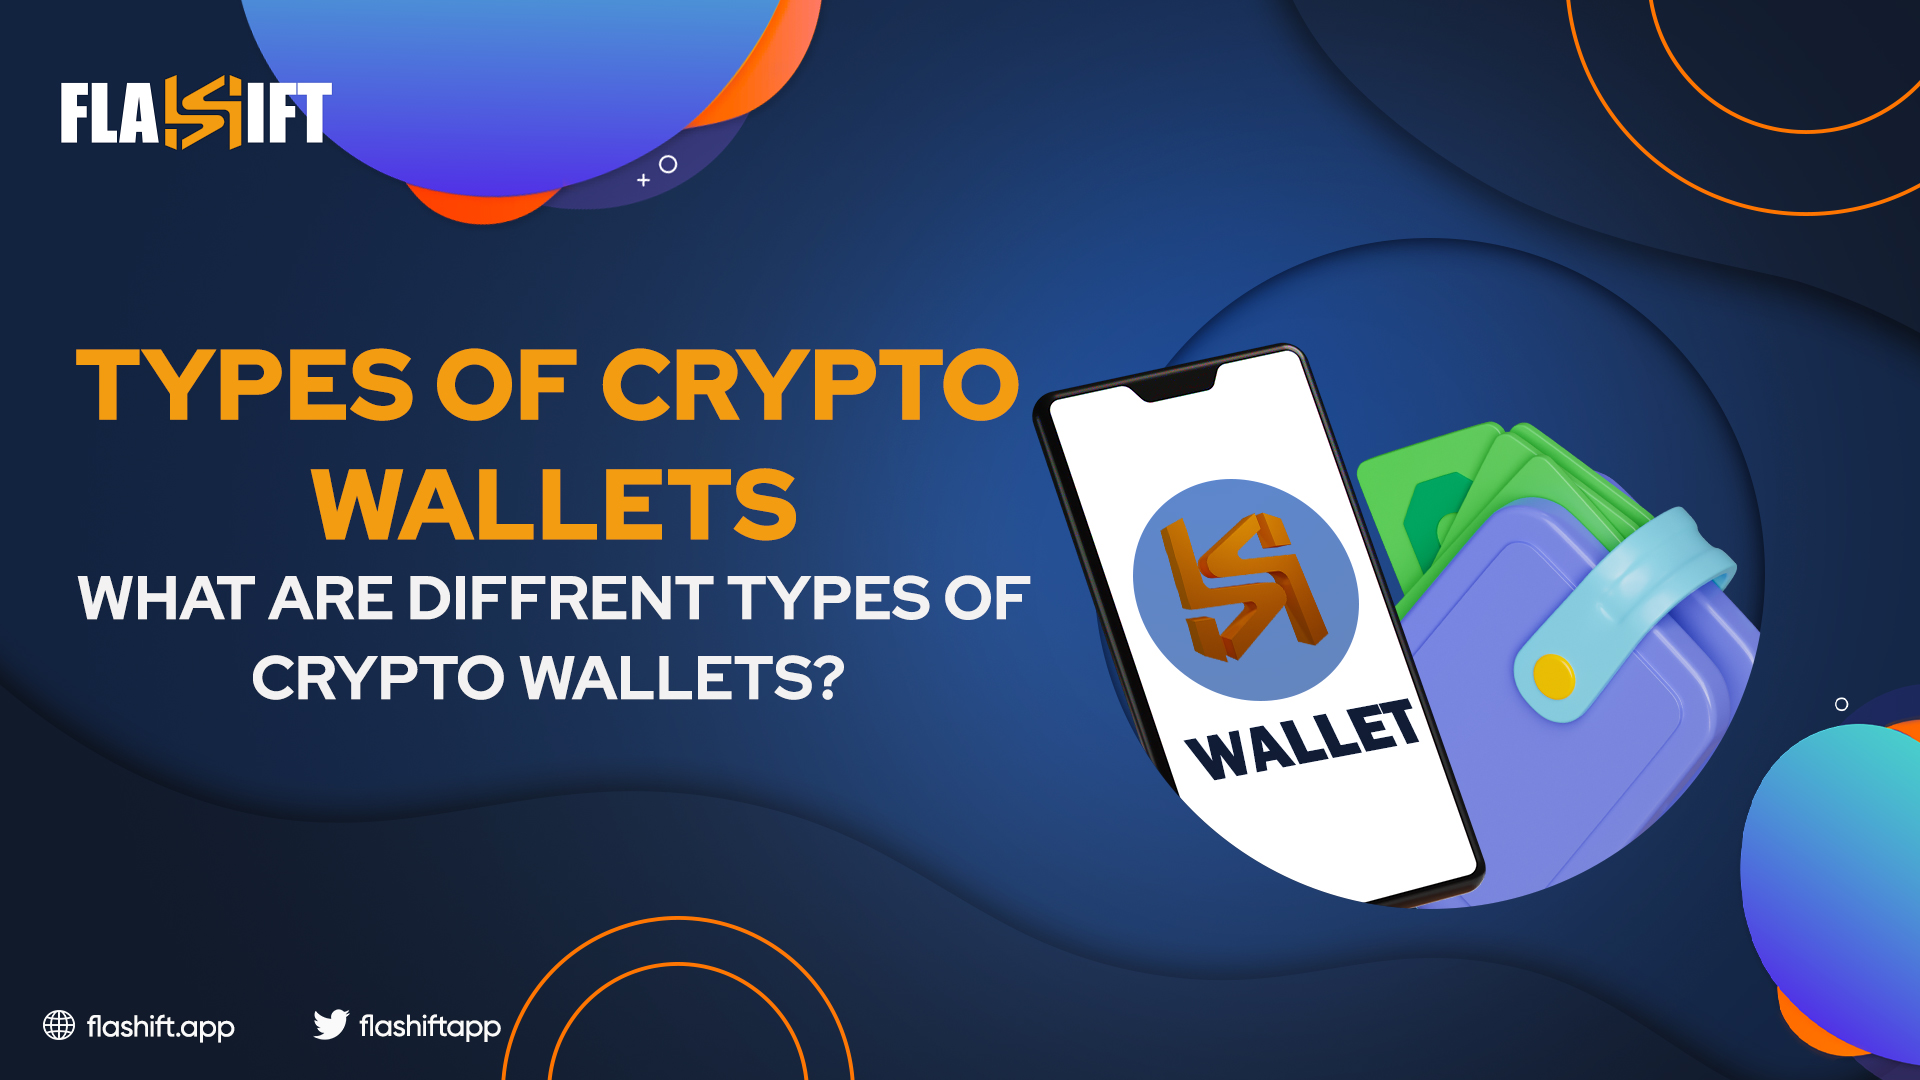 What are different types of Crypto wallets and how do they work?